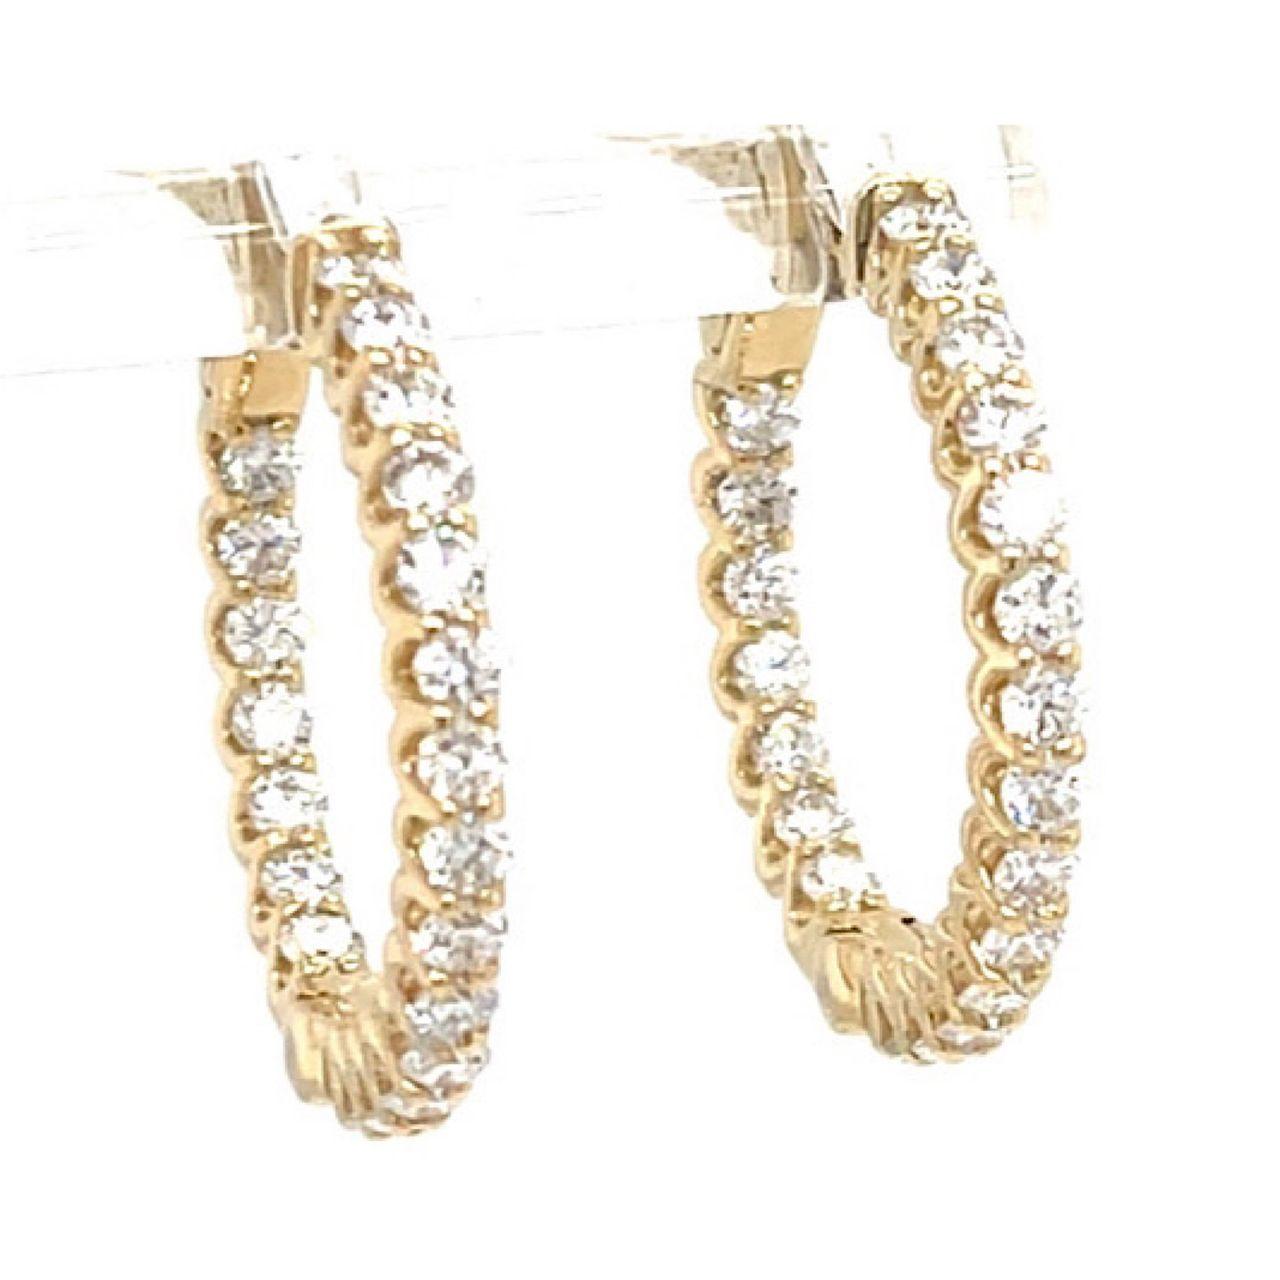 Contemporary 3.42 Carats Diamond Hoop Earrings in 14k Yellow Gold For Sale